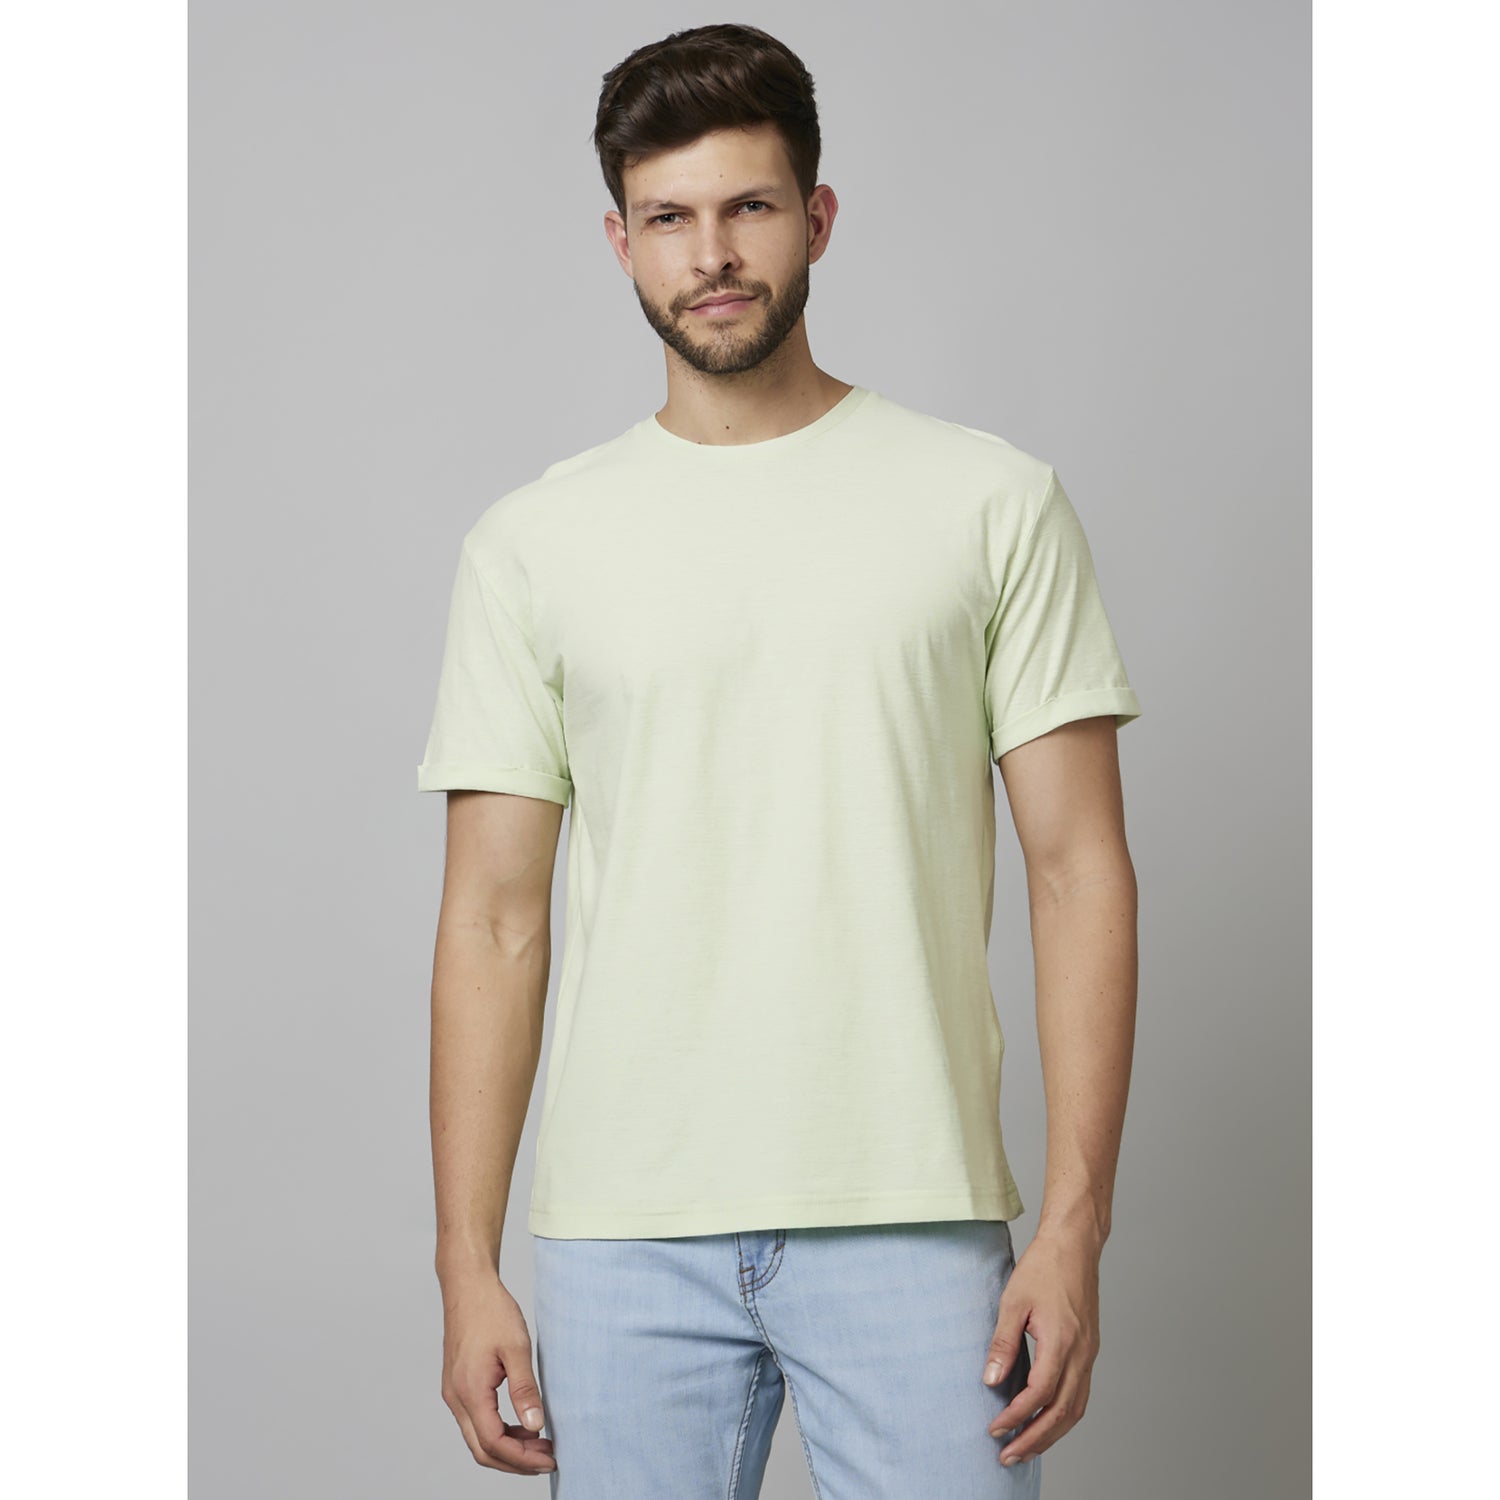 Green Solid Short Sleeve Cotton T-Shirts (FECOLA)